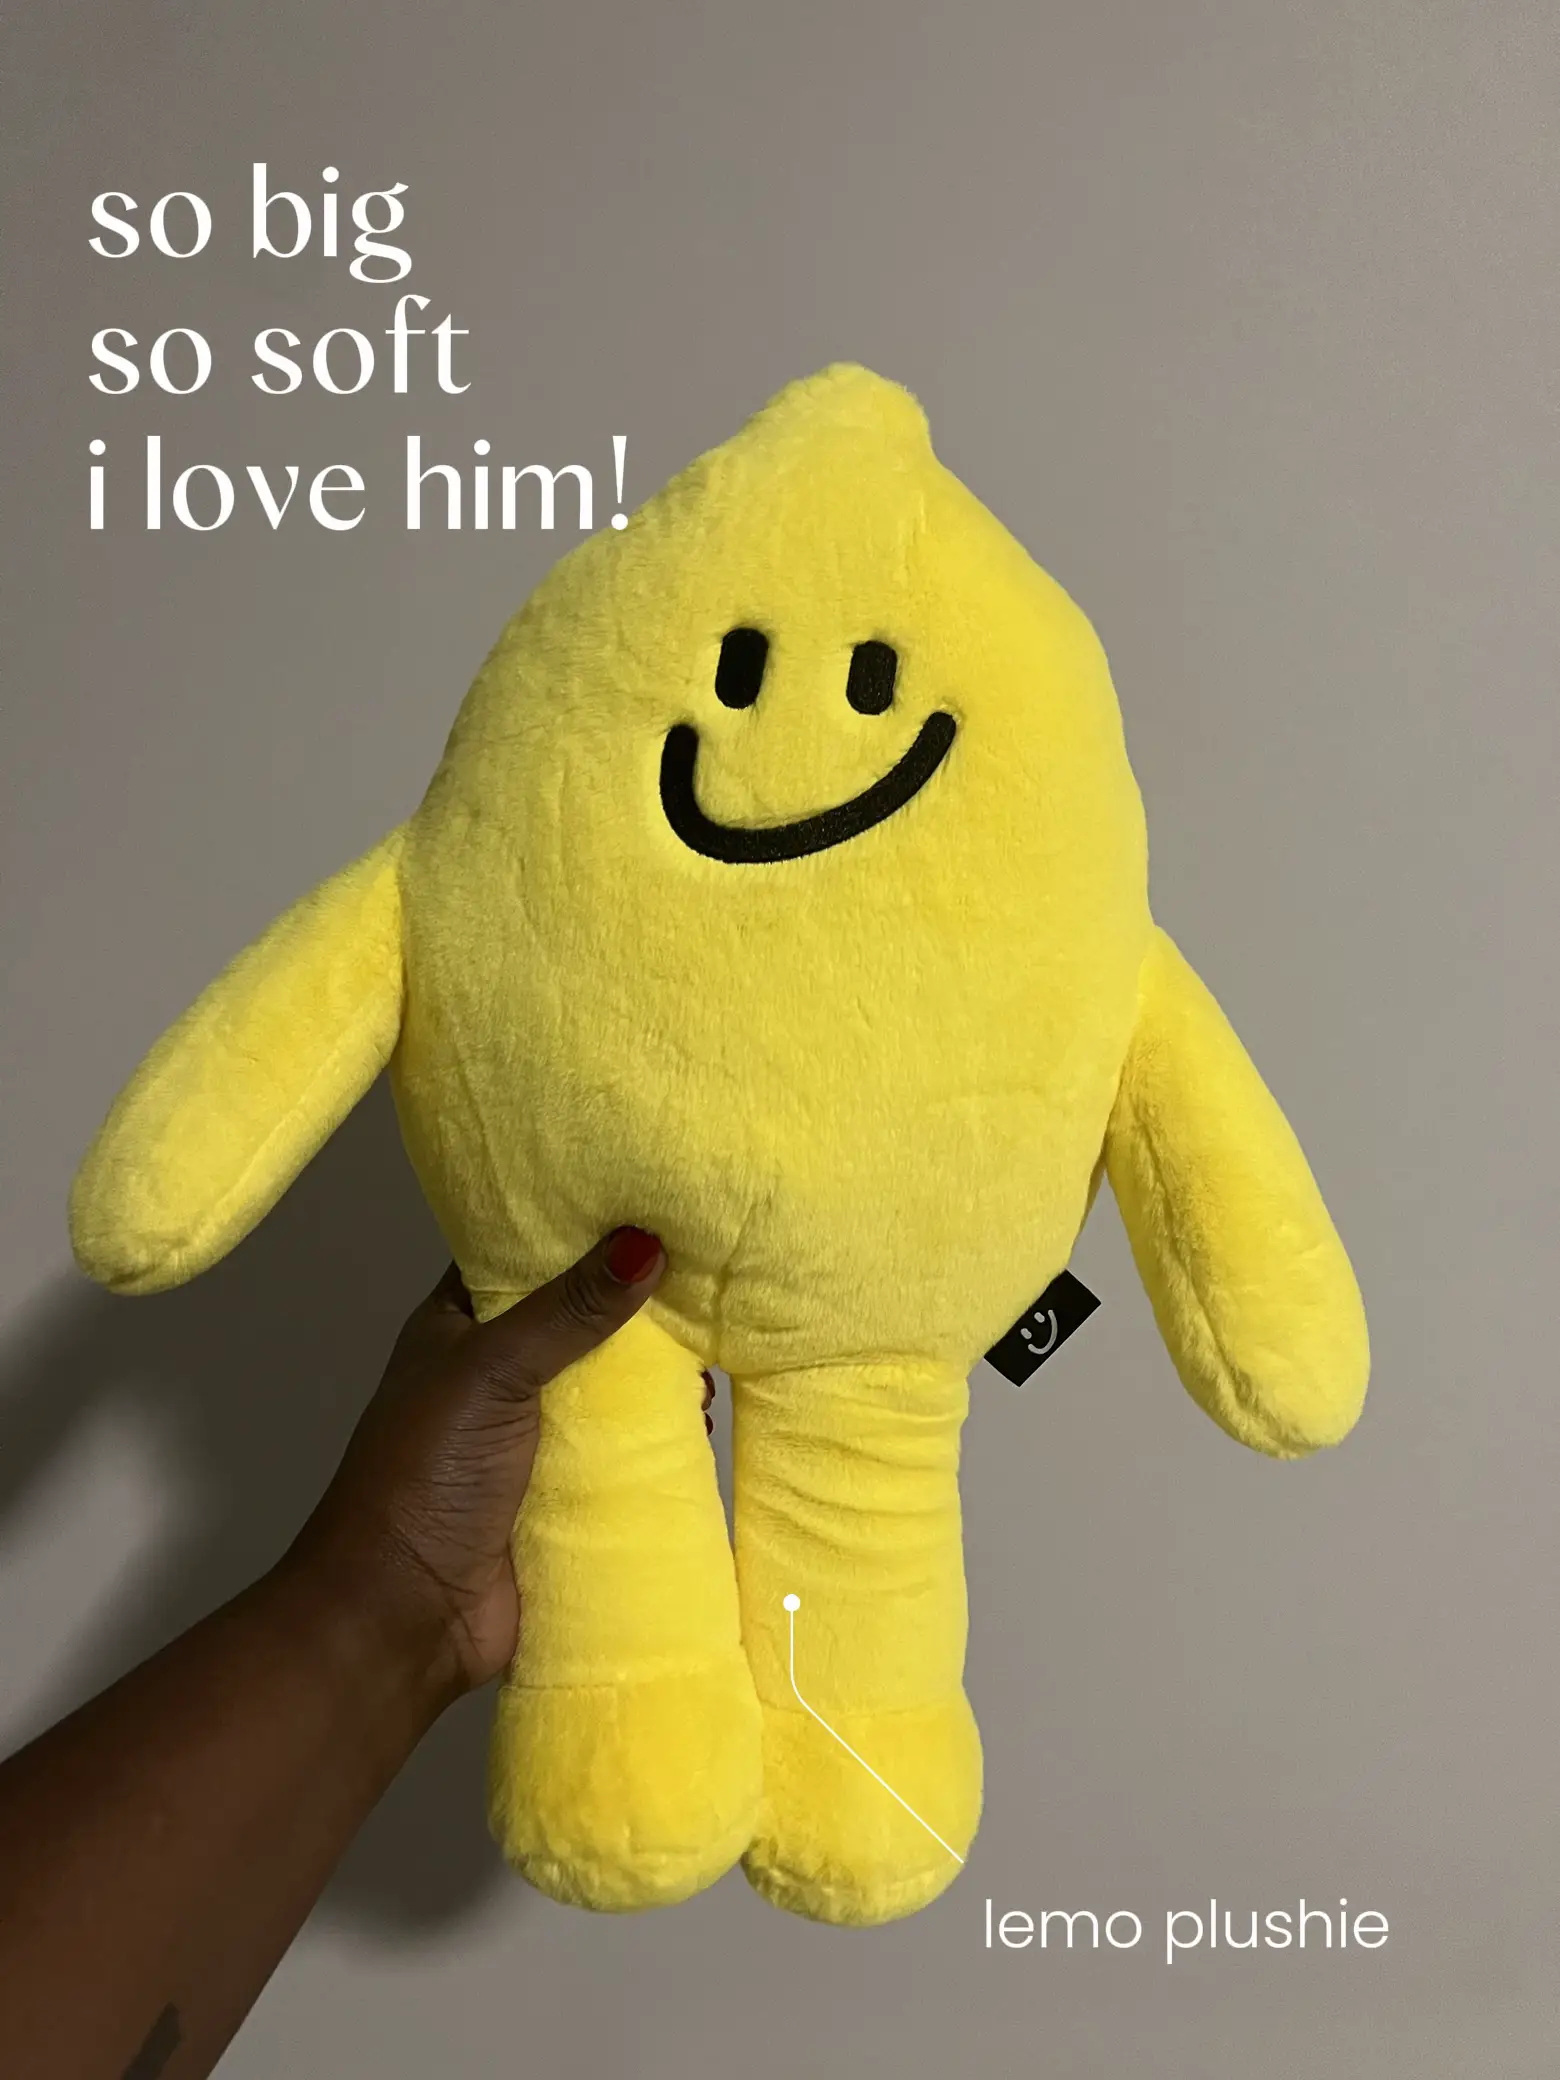  A person is holding a yellow plushie that says "I love him!".